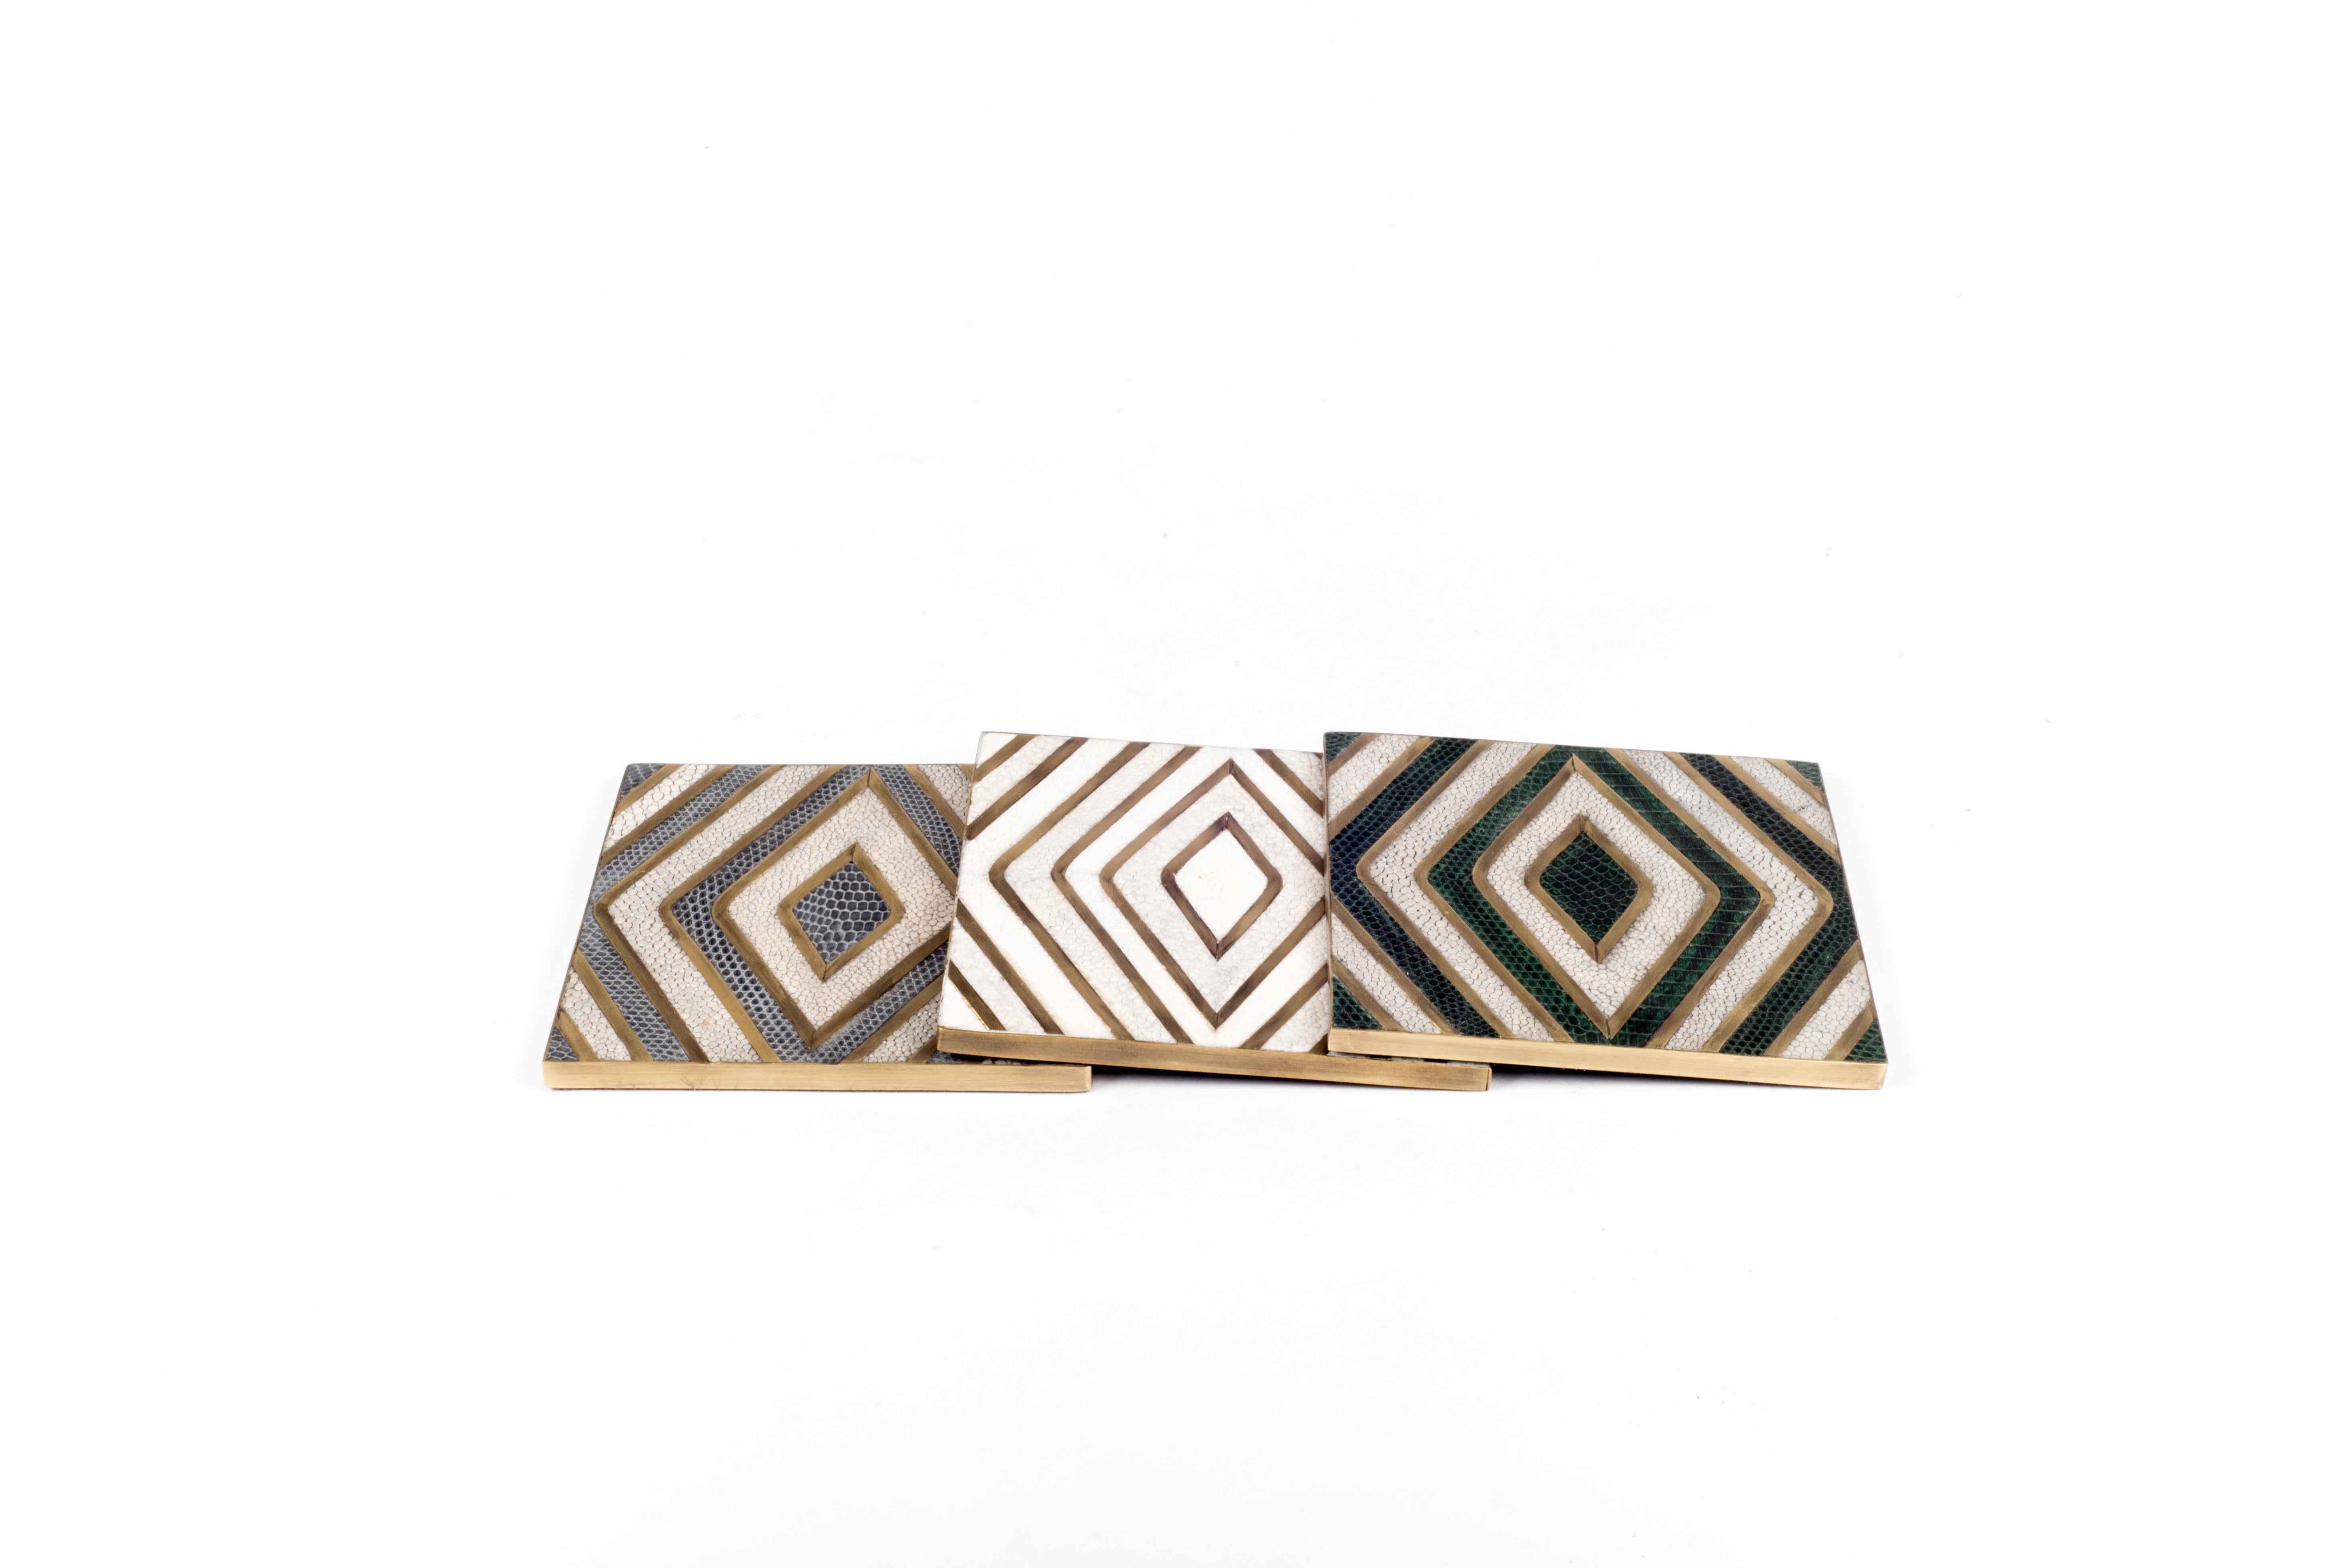 Inlay Set of 4 Geometric Coasters Inlaid in Shagreen, Shell and Brass by Kifu Paris For Sale